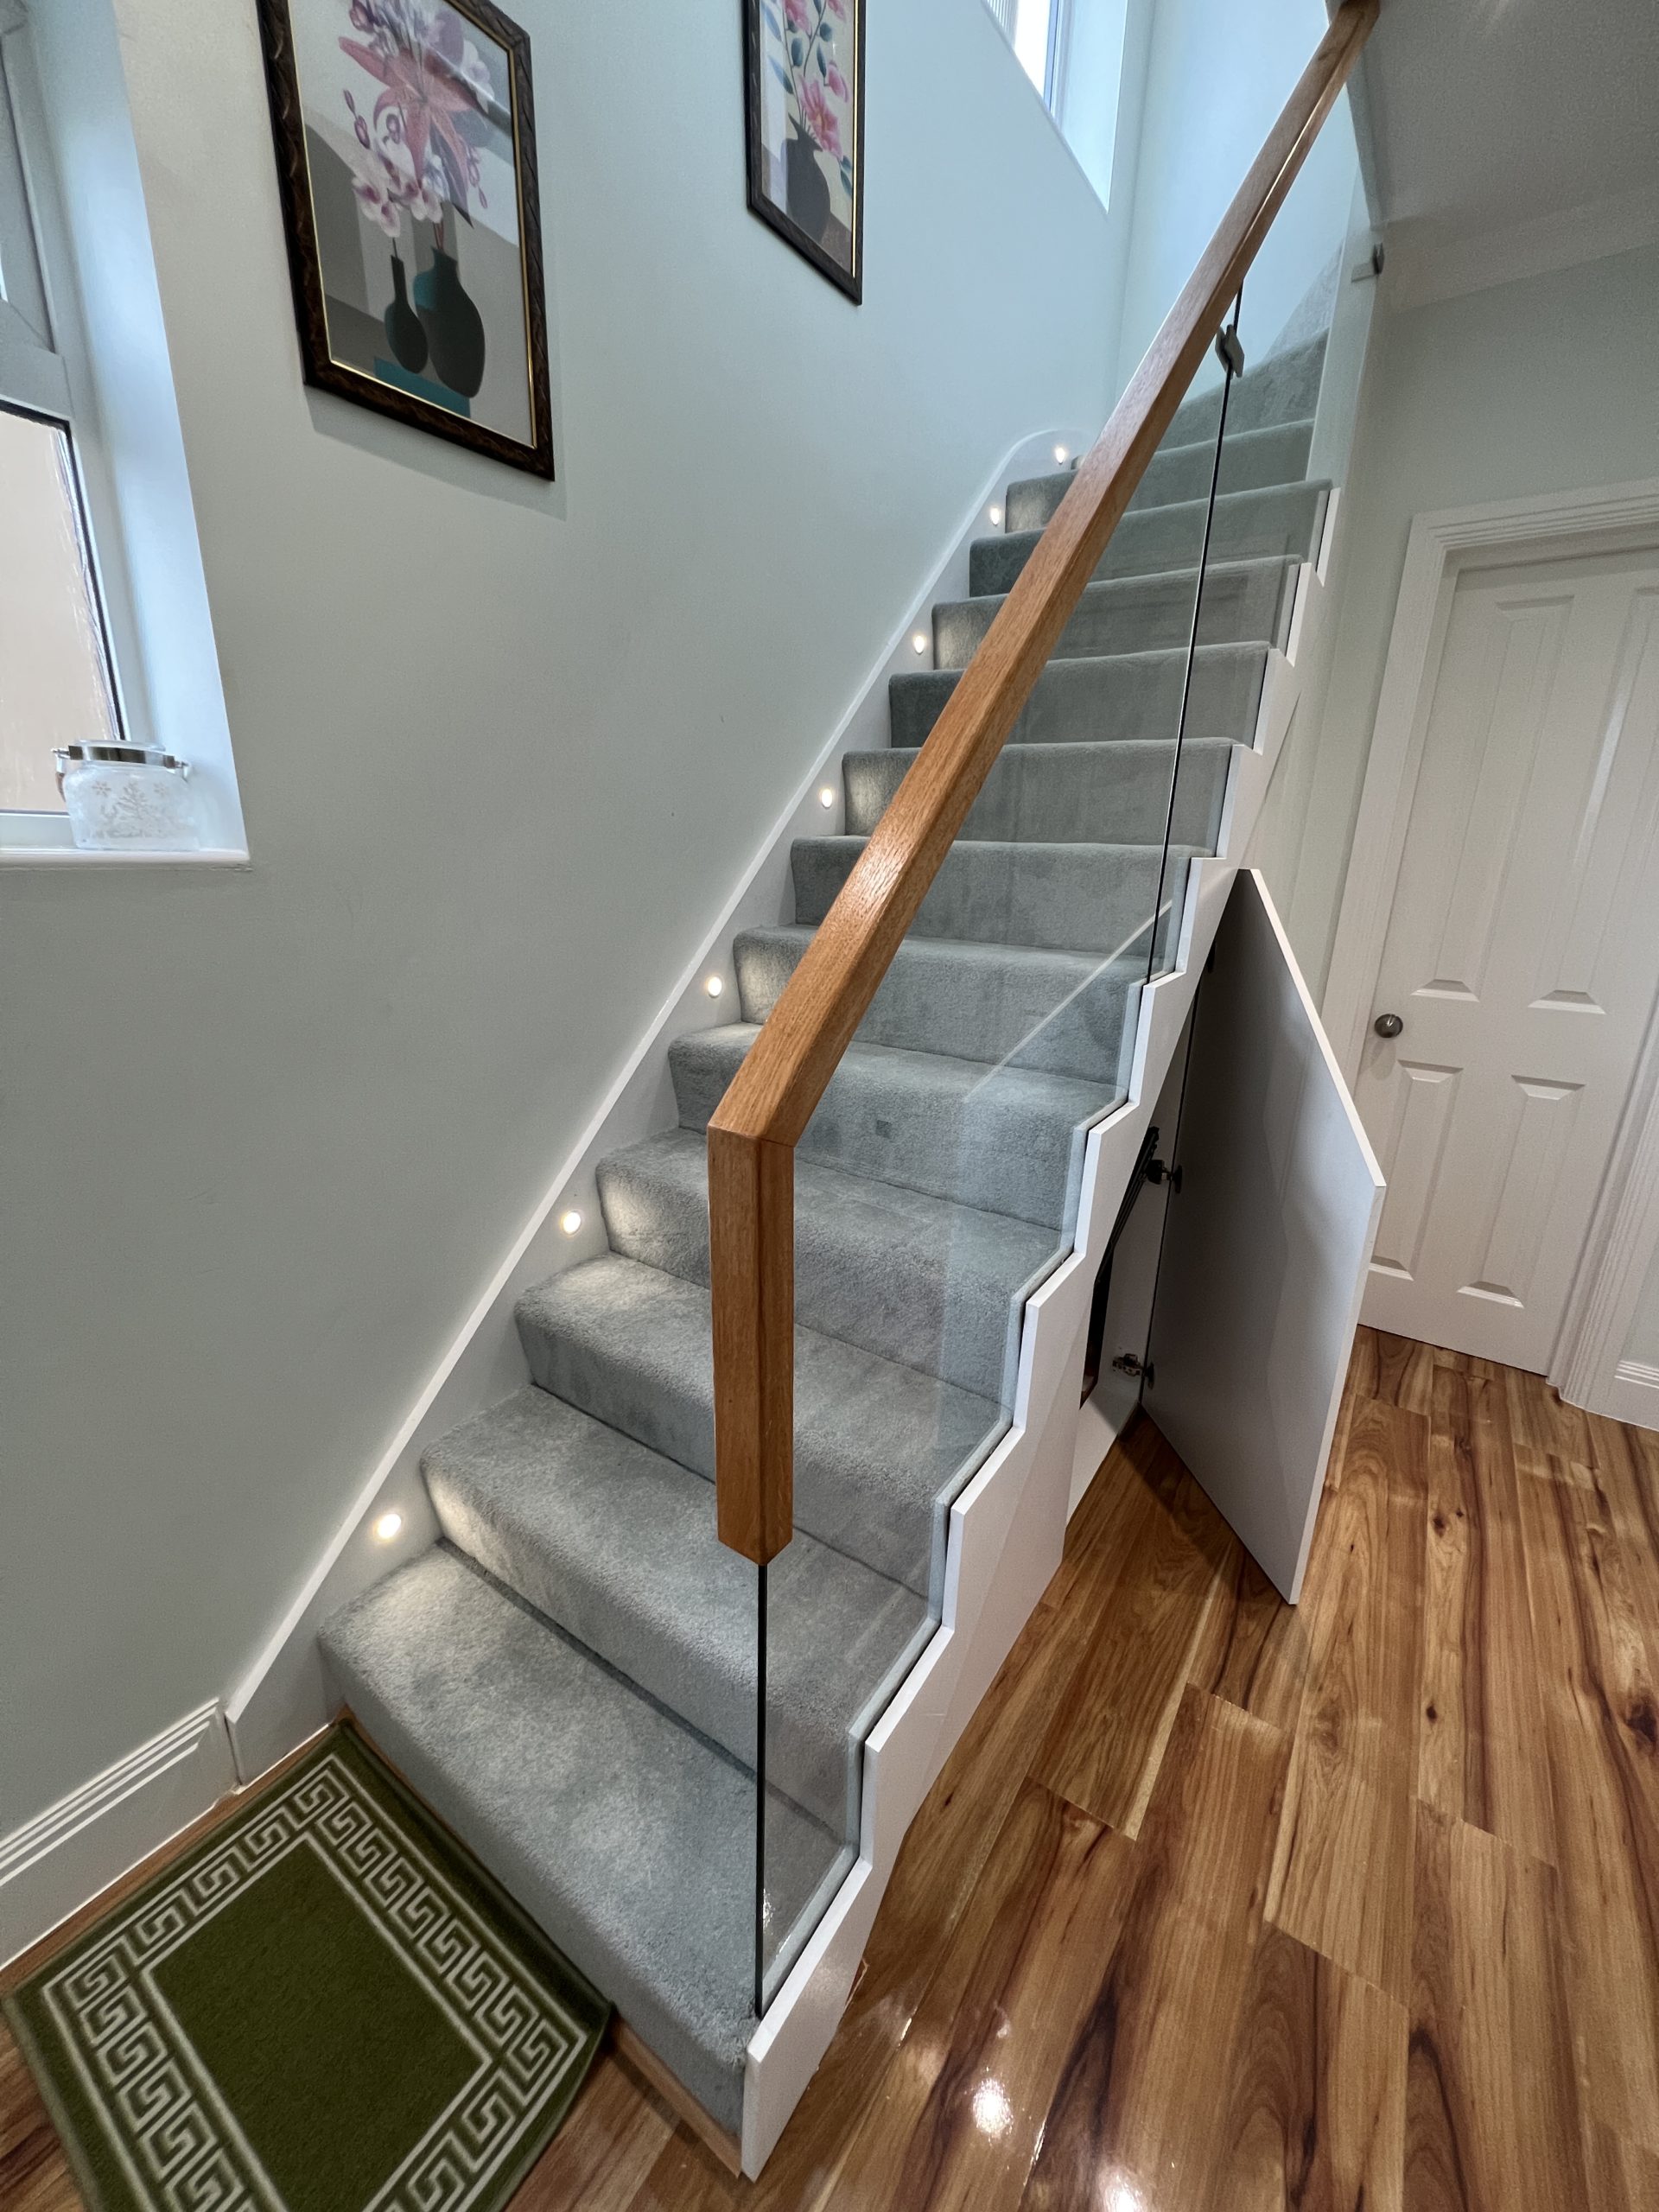 Wooden staircase with grey carpet and wooden handrail